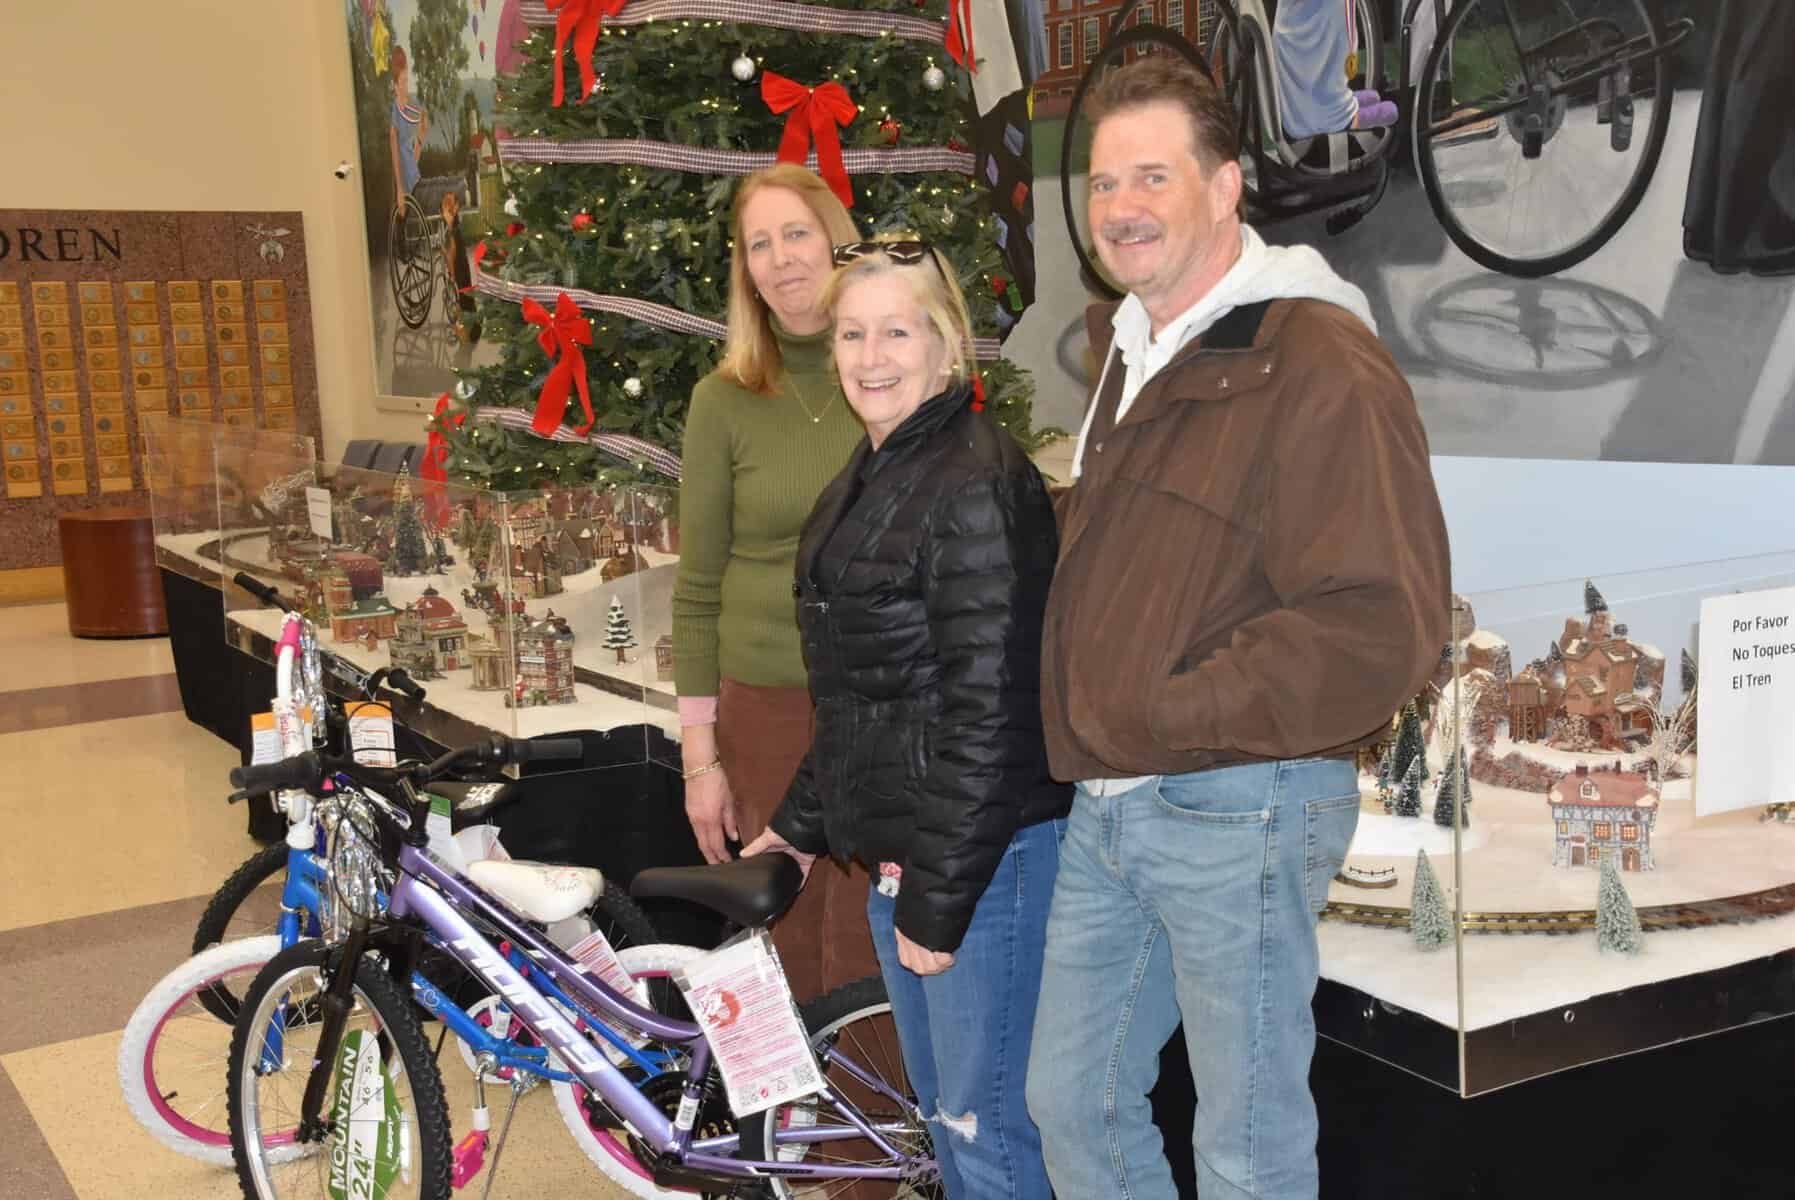 2,000 donated bikes and counting